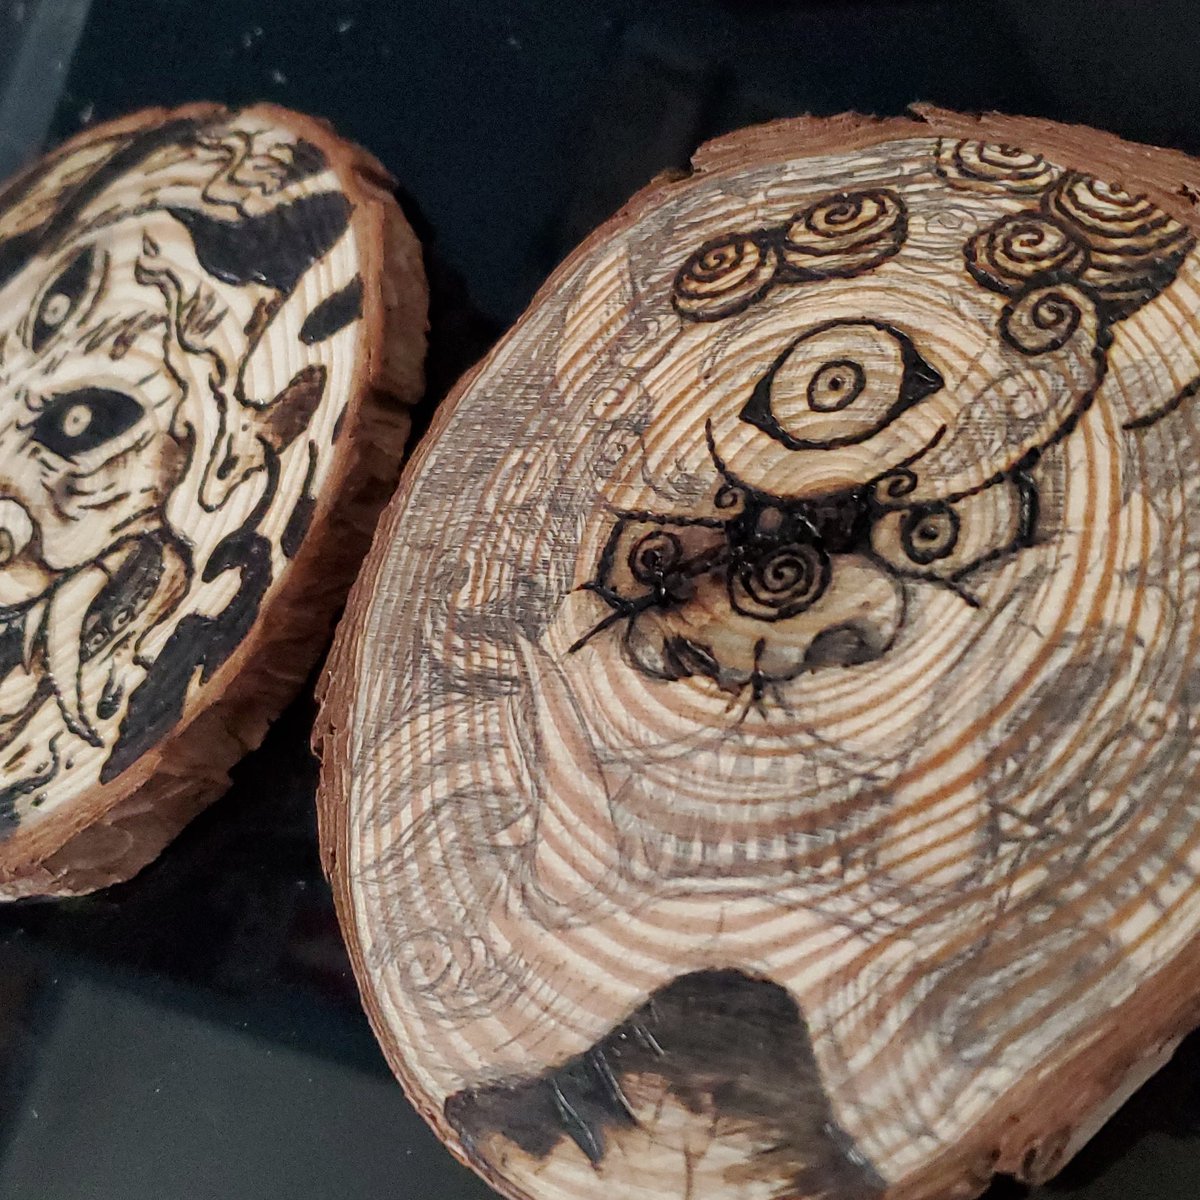 Later today, I will stream for the first time on Twitch! I will be woodburning my second wood coaster. Twitch.tv/yasmineabedart
#yasmineabedart #art #artist #woodburning #twitch #twitchstreamer #twitchtv #artstream #live #foodog #fudog #illustrations #woodcoasters #handmade